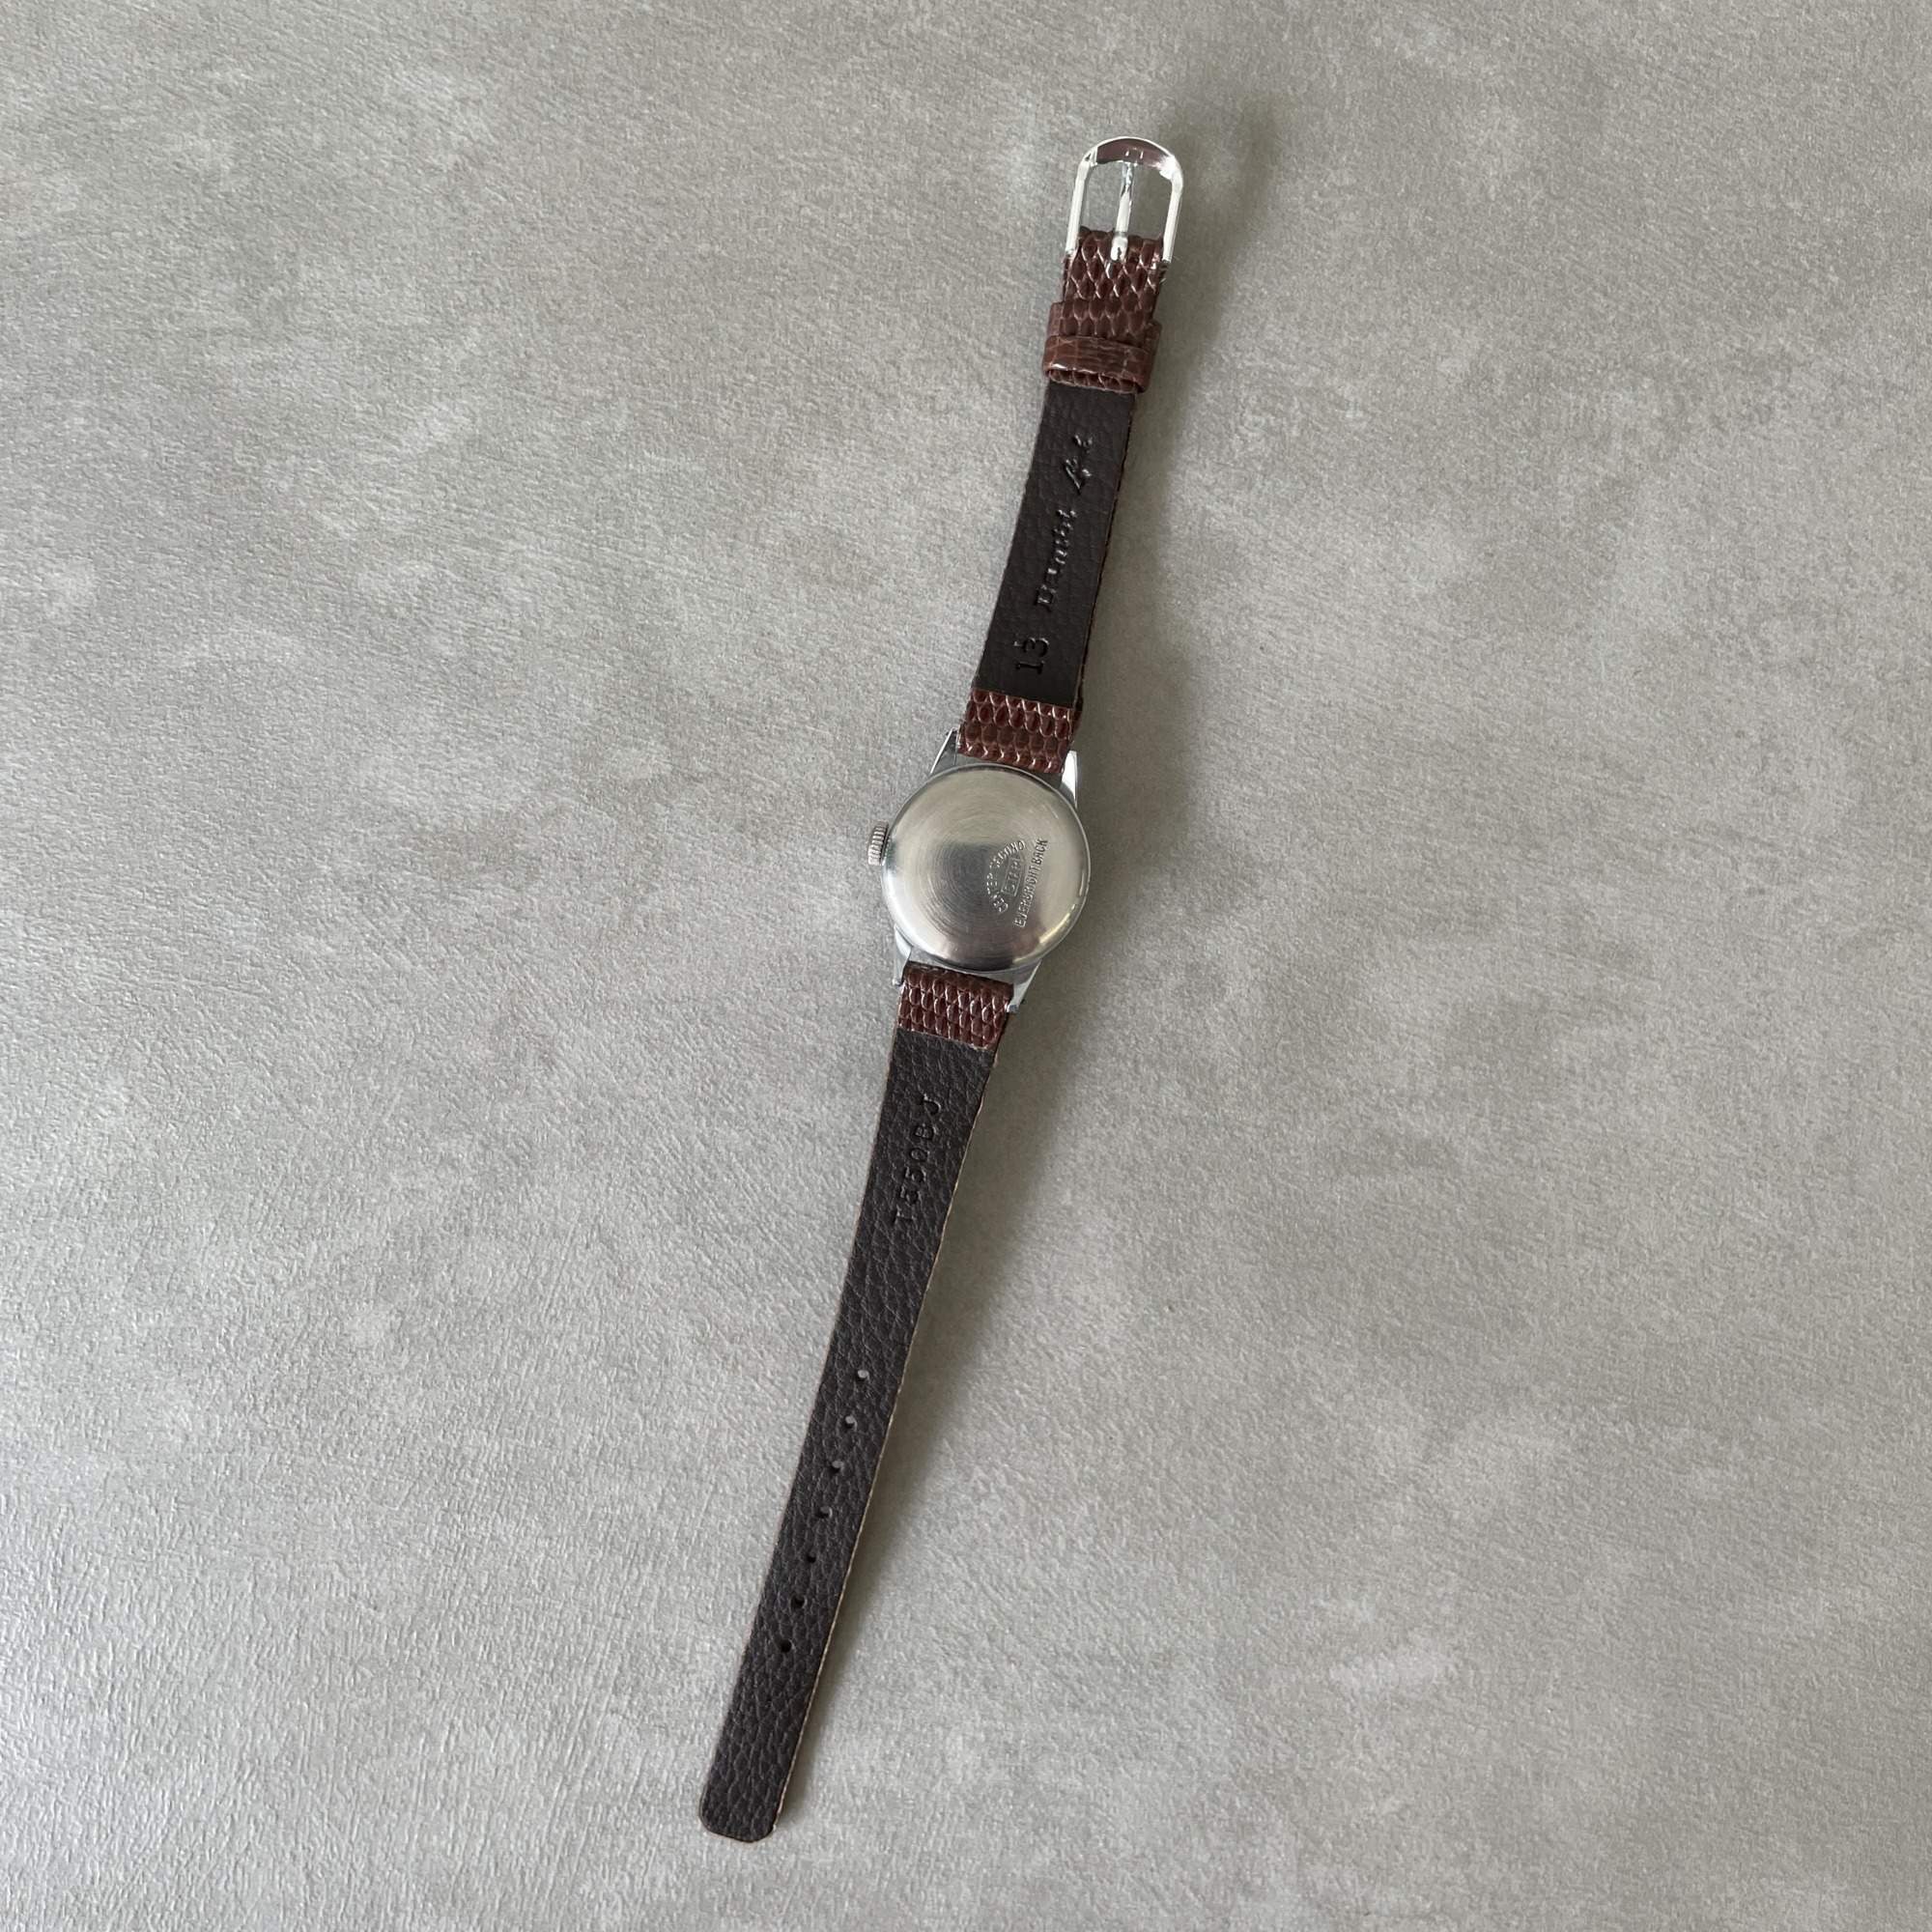 CITIZENOthers 1950s Vintage Watch / CENTER SECOND